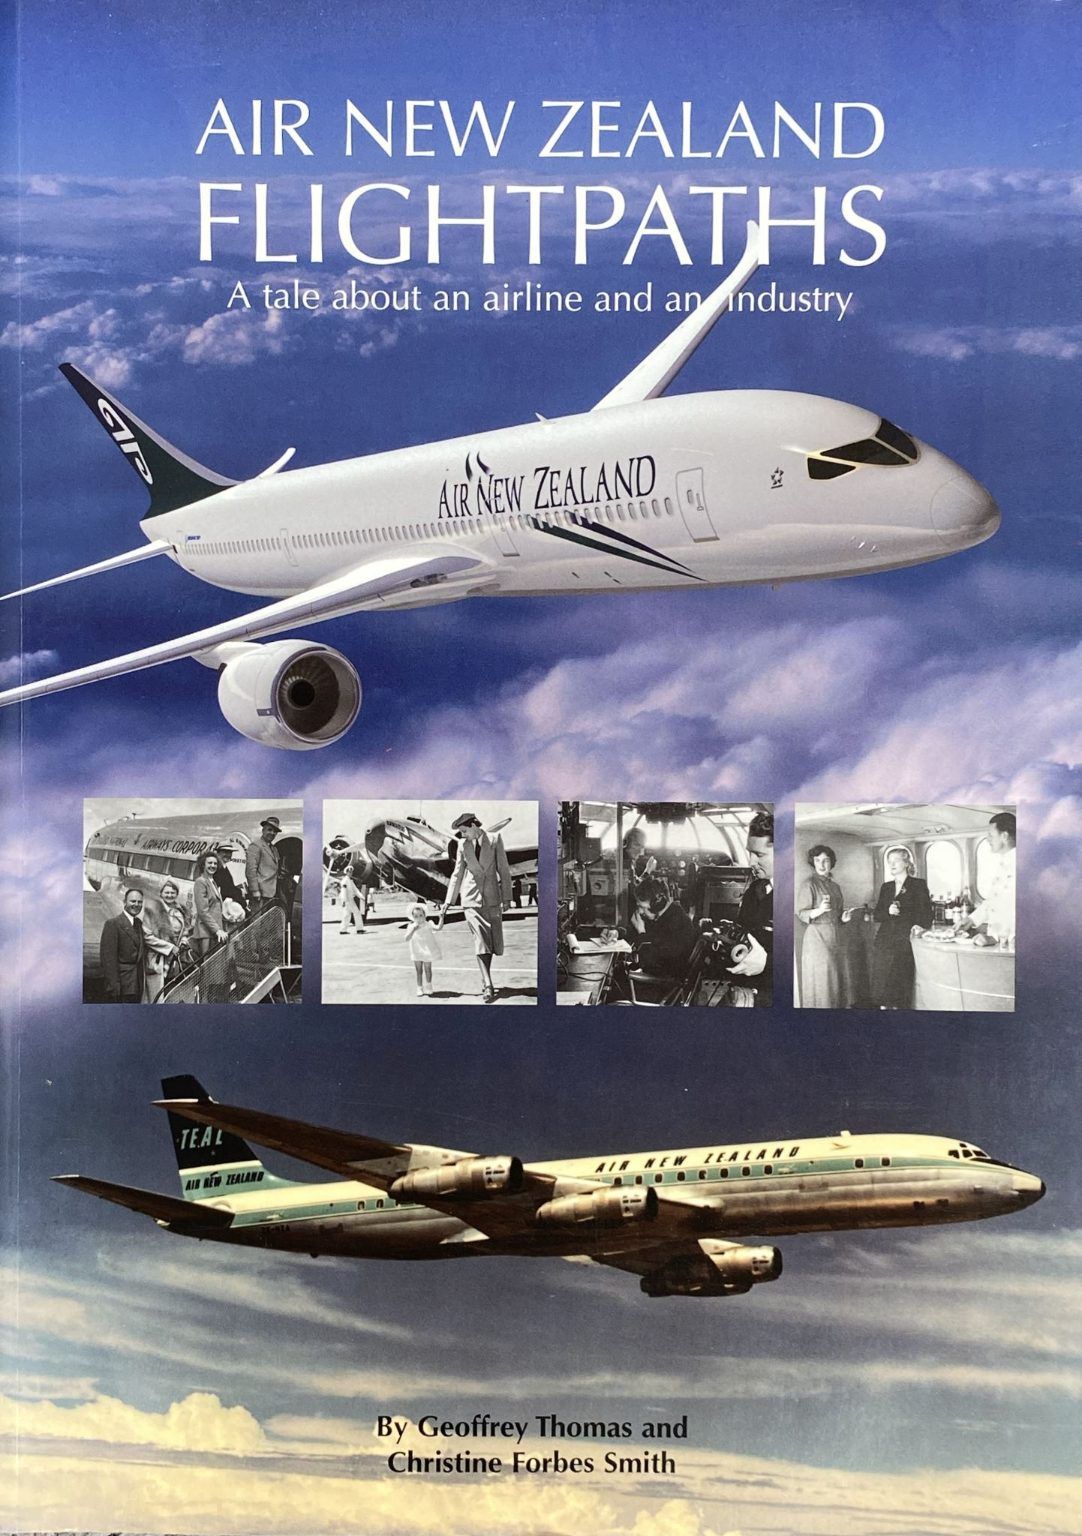 AIR NEW ZEALAND FLIGHTPATHS: The Tale of an Industry and an Airline